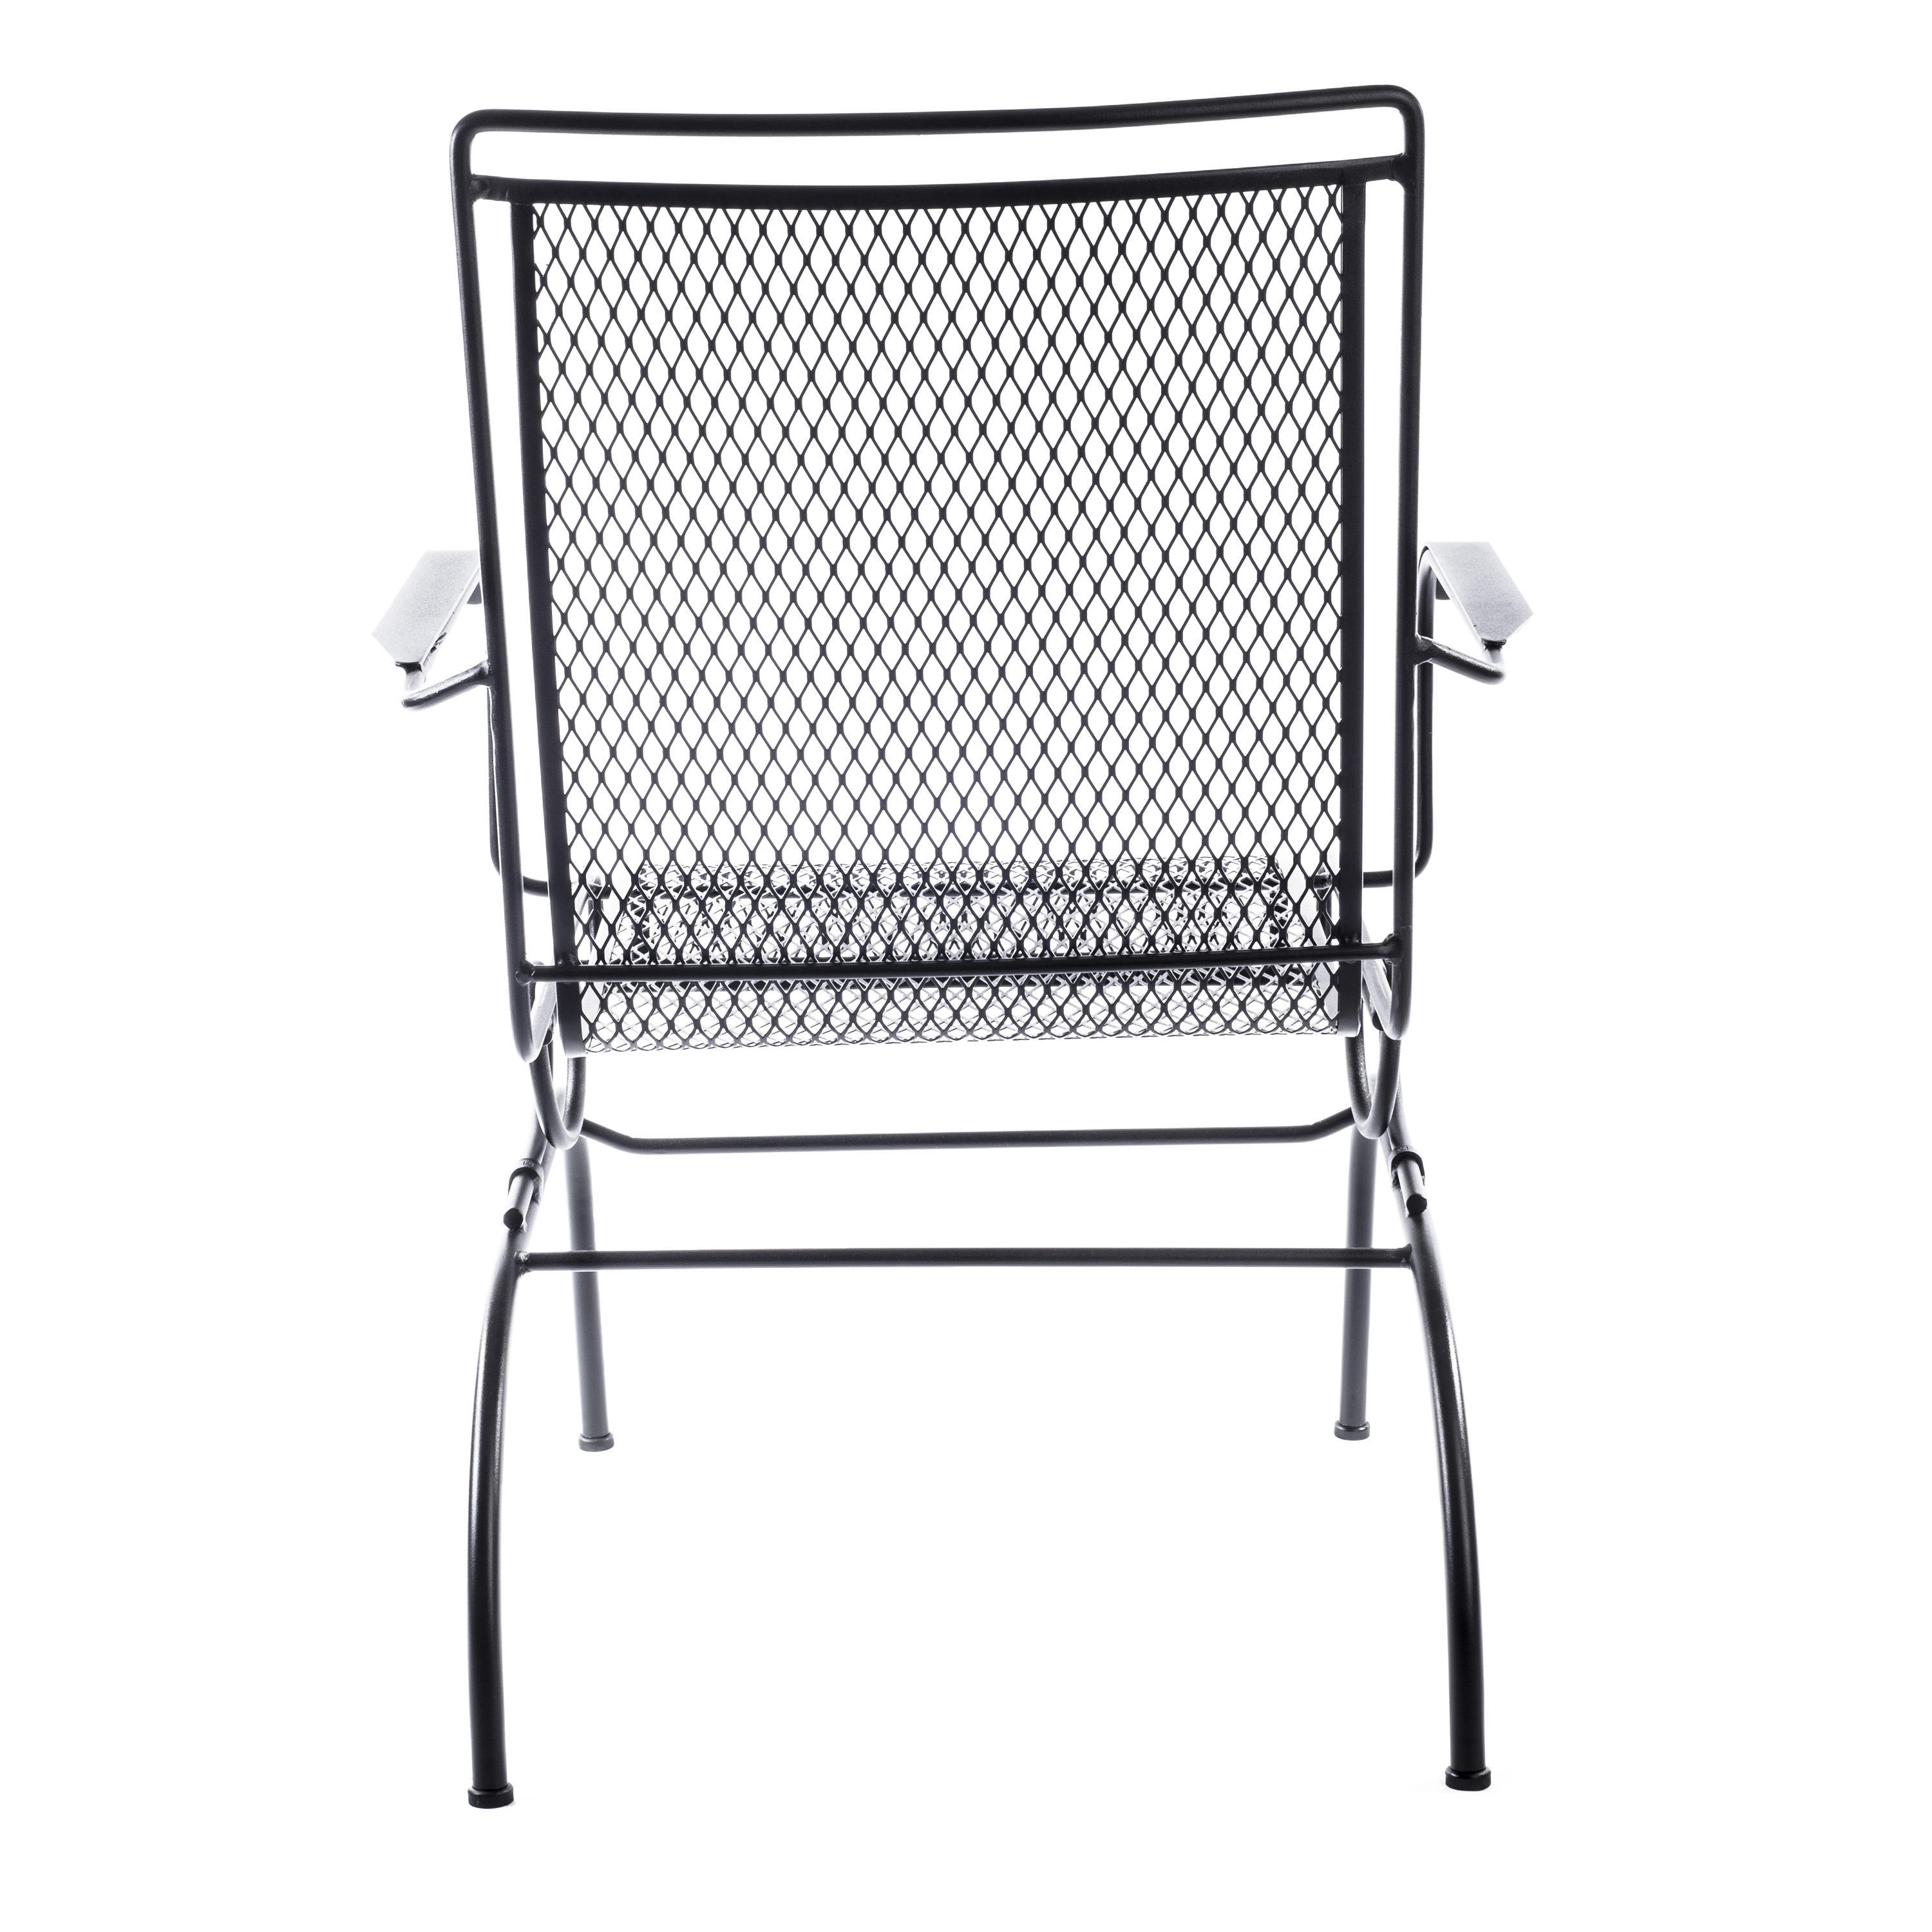 Arlington House Wrought Iron Outdoor Action Dining Chair, Charcoal - image 4 of 5